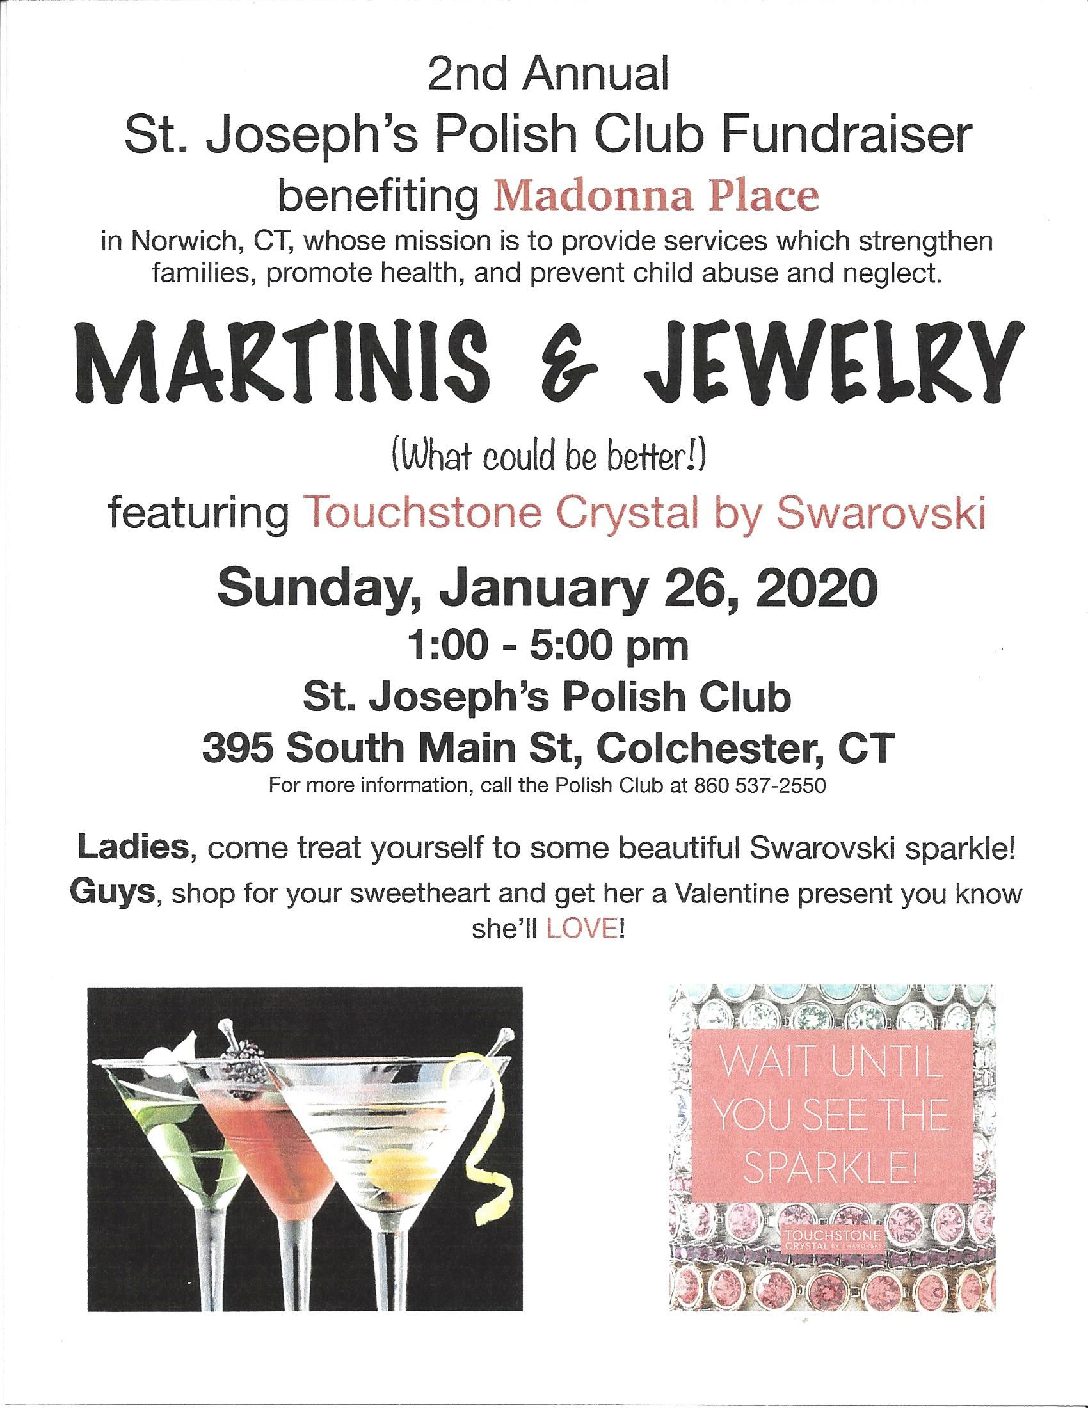 St. Joseph’s Polish Club (featuring Touchstone Crystal by Swarovski) Jewelry Fundraiser to benefit Madonna Place